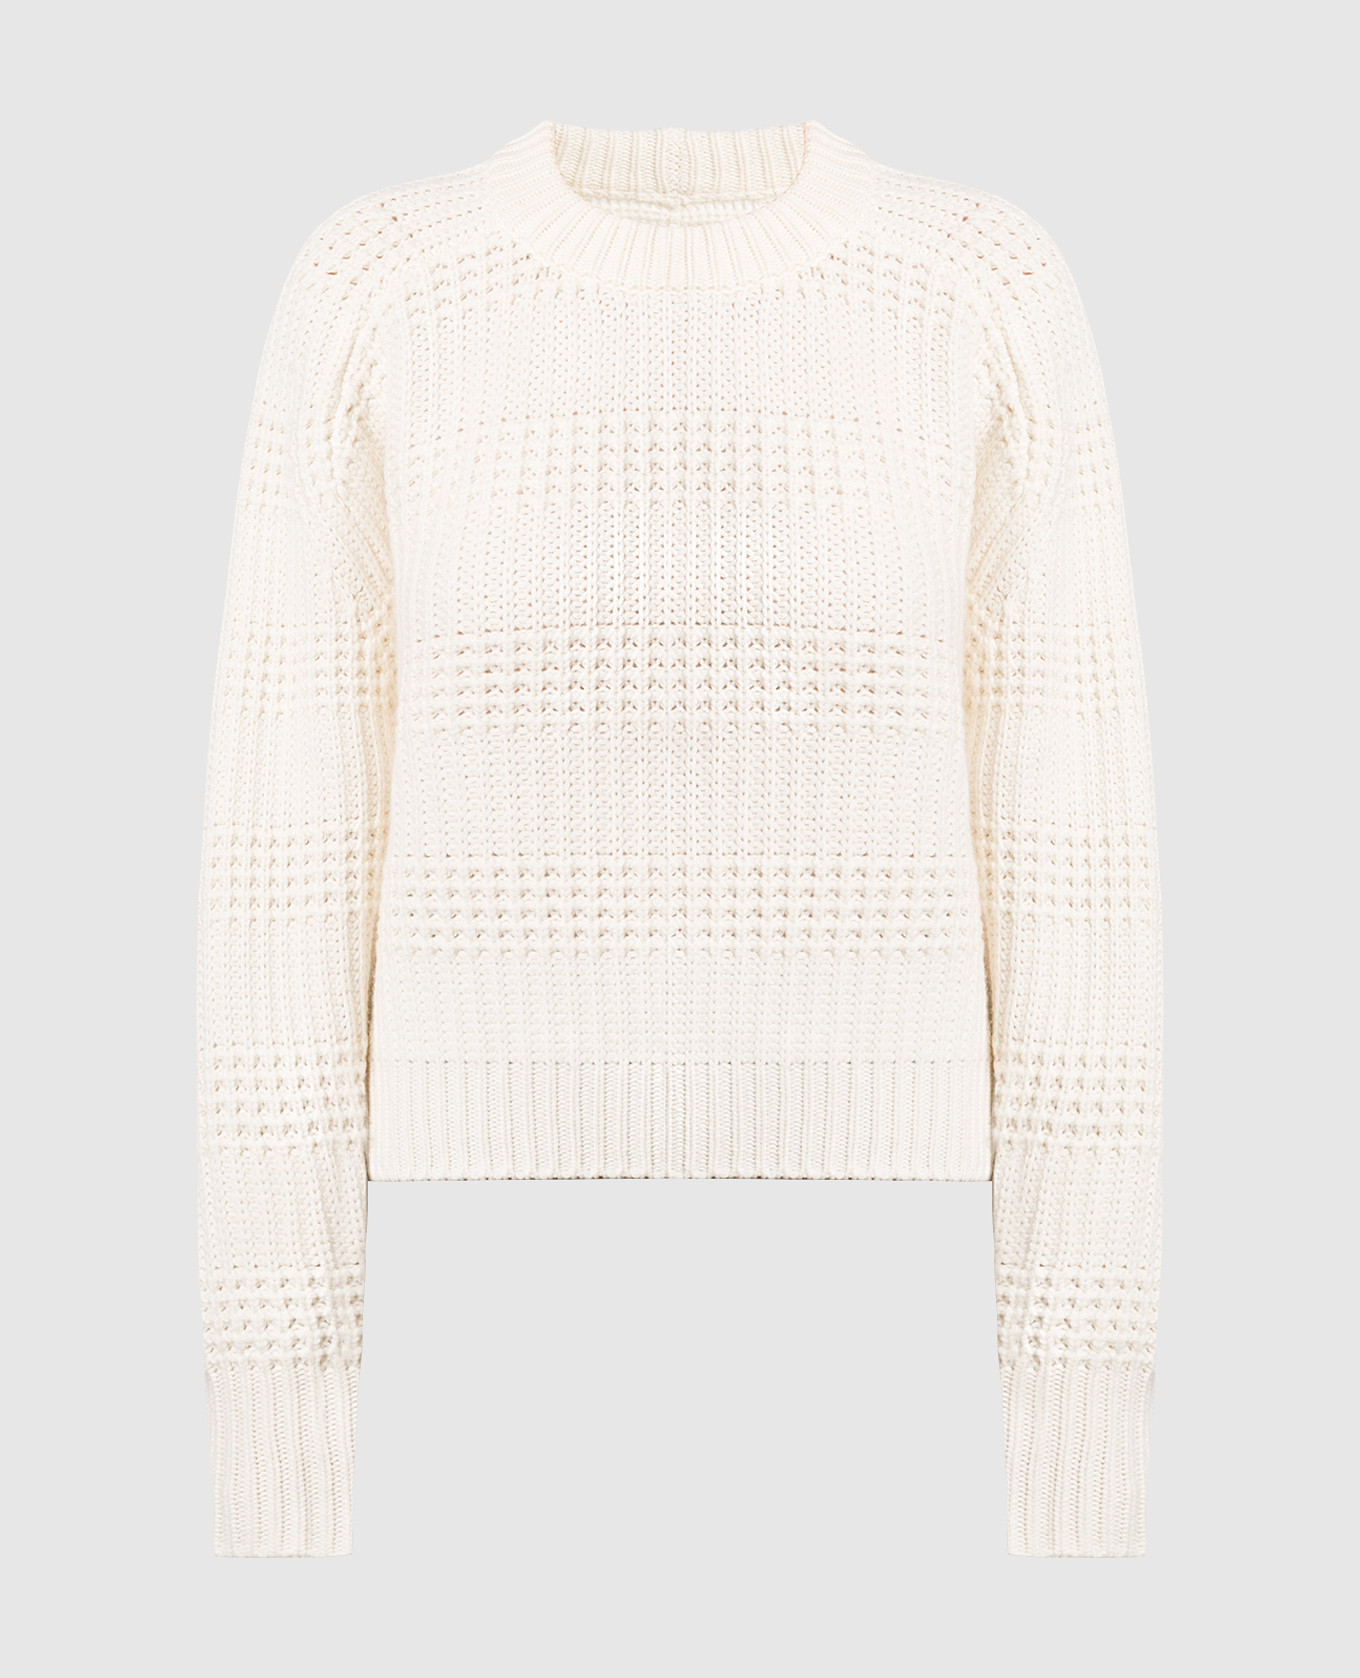 White sweater made of cashmere in a textured pattern